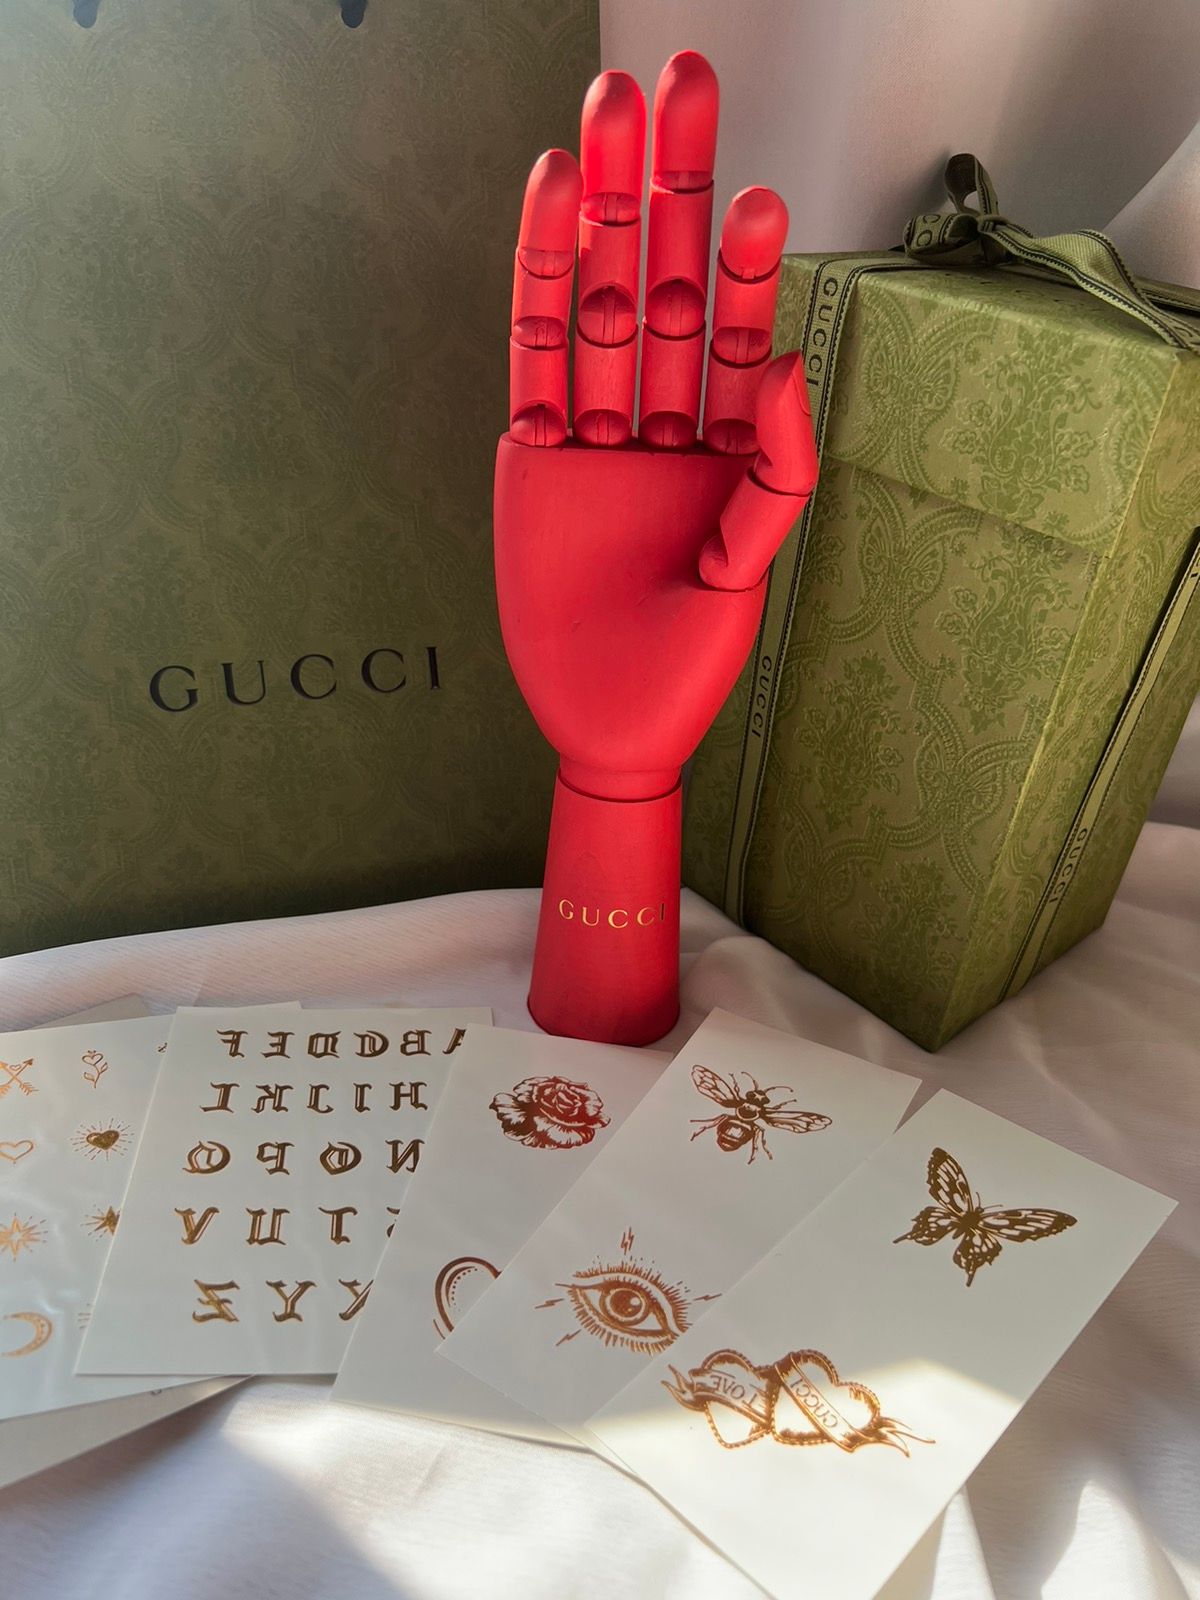 Gucci Gucci wooden Hand mannequin Jewelry display tattoo Decor